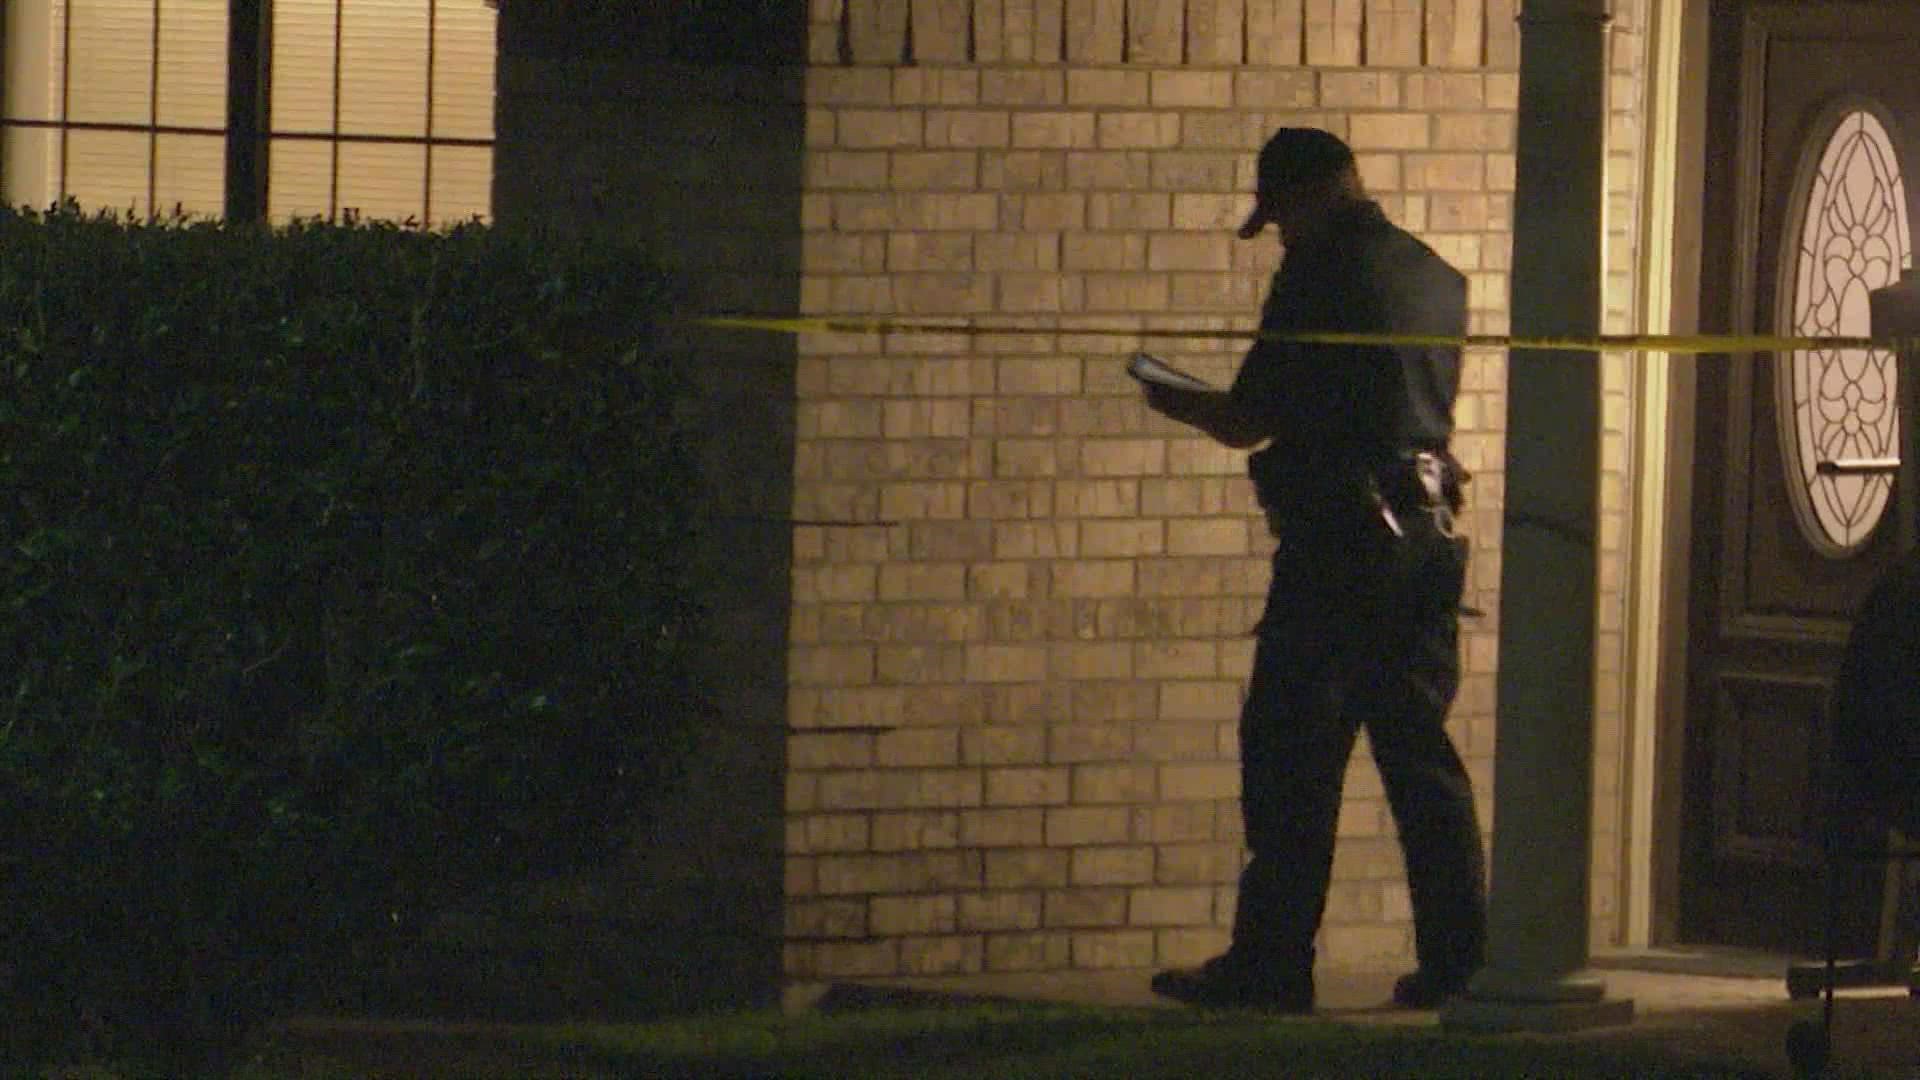 Houston police say the boy was hit in the upper body and was rushed to a trauma center.